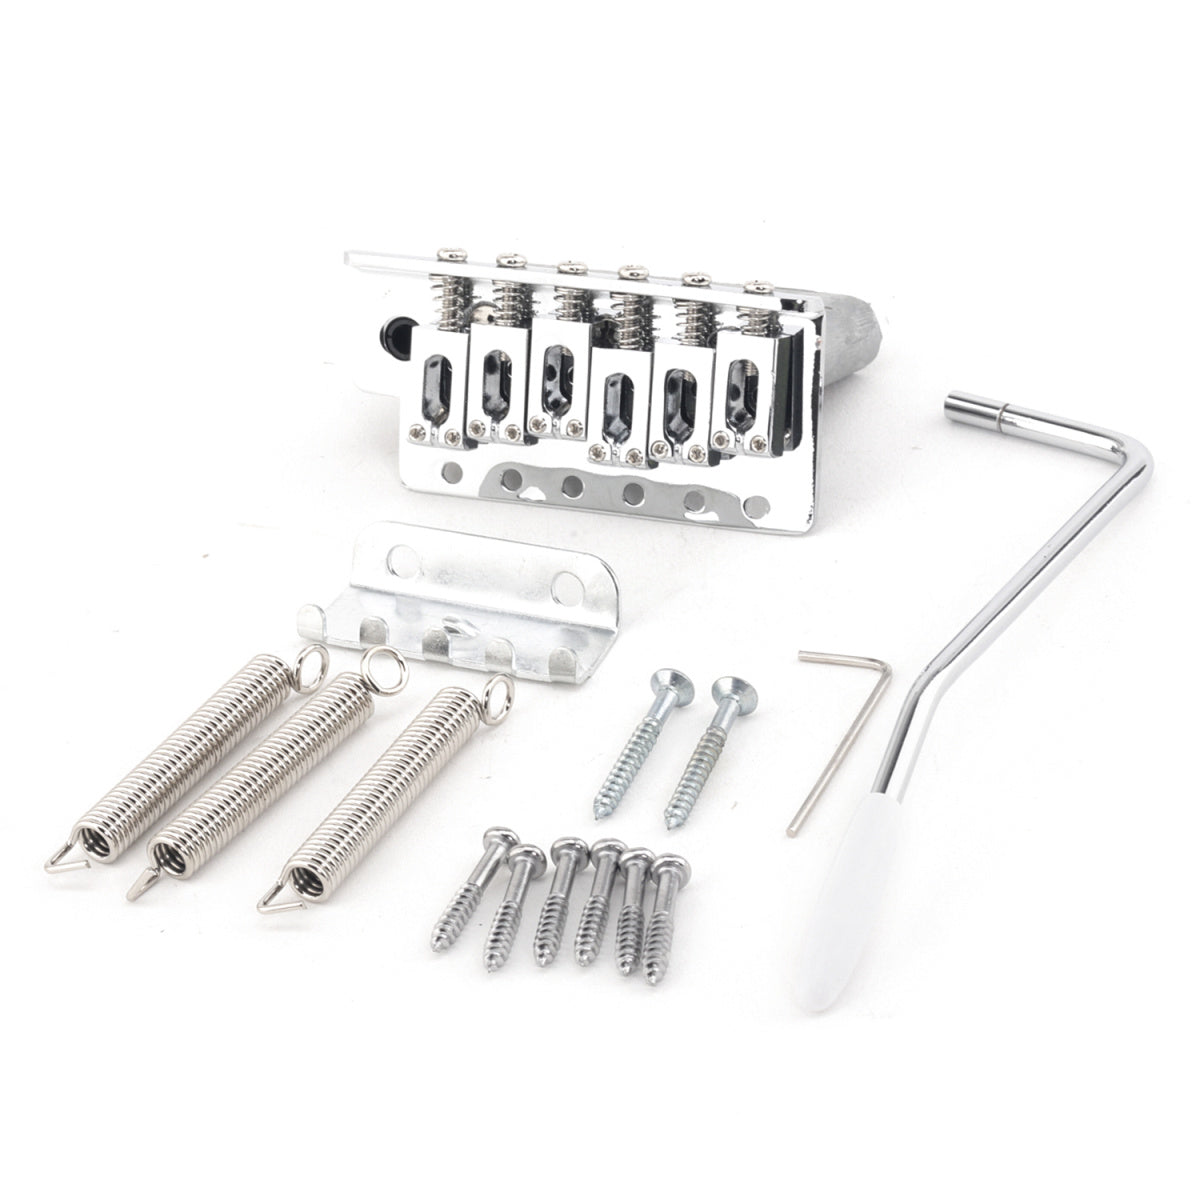 Musiclily Pro 54mm Modern Stratocaster Tremolo Bridge Assembly Set for Strat Style Electric Guitar, Chrome